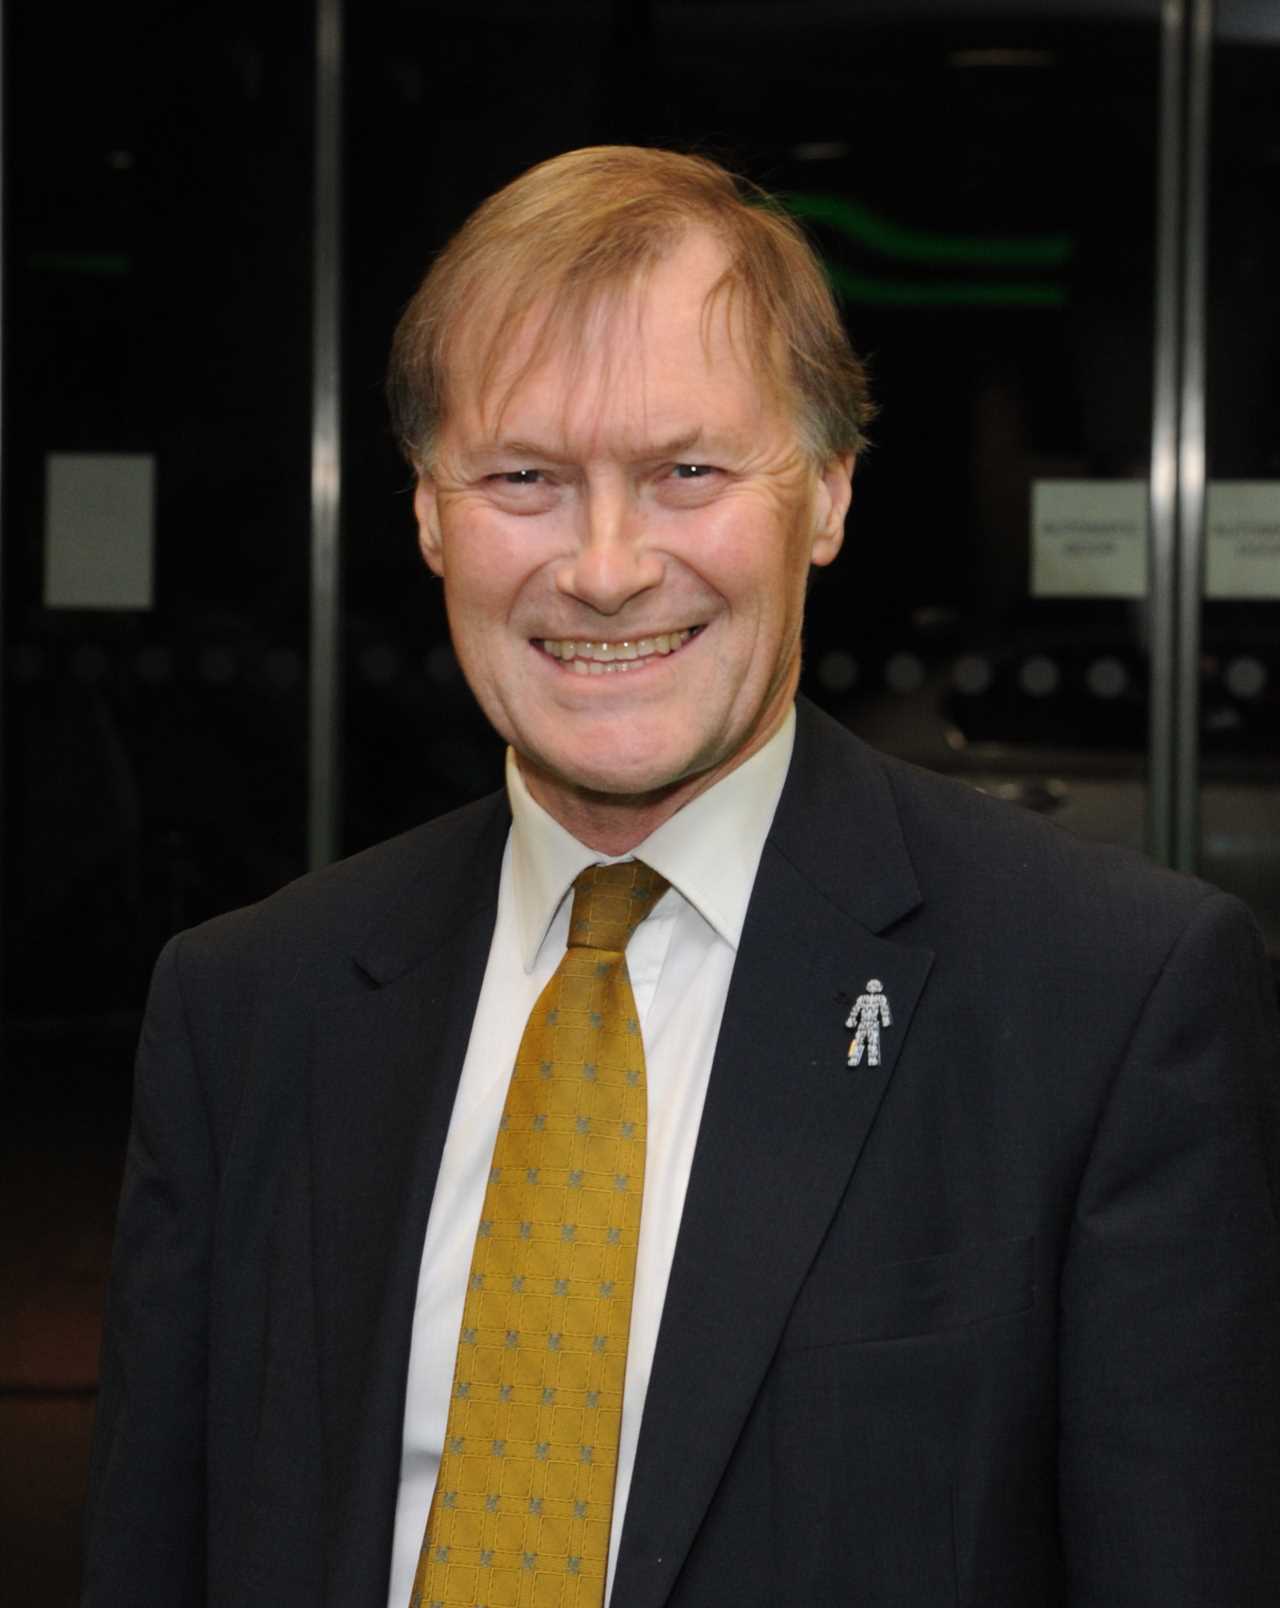 Priti Patel launches review into MPs’ safety after killing of Sir David Amess